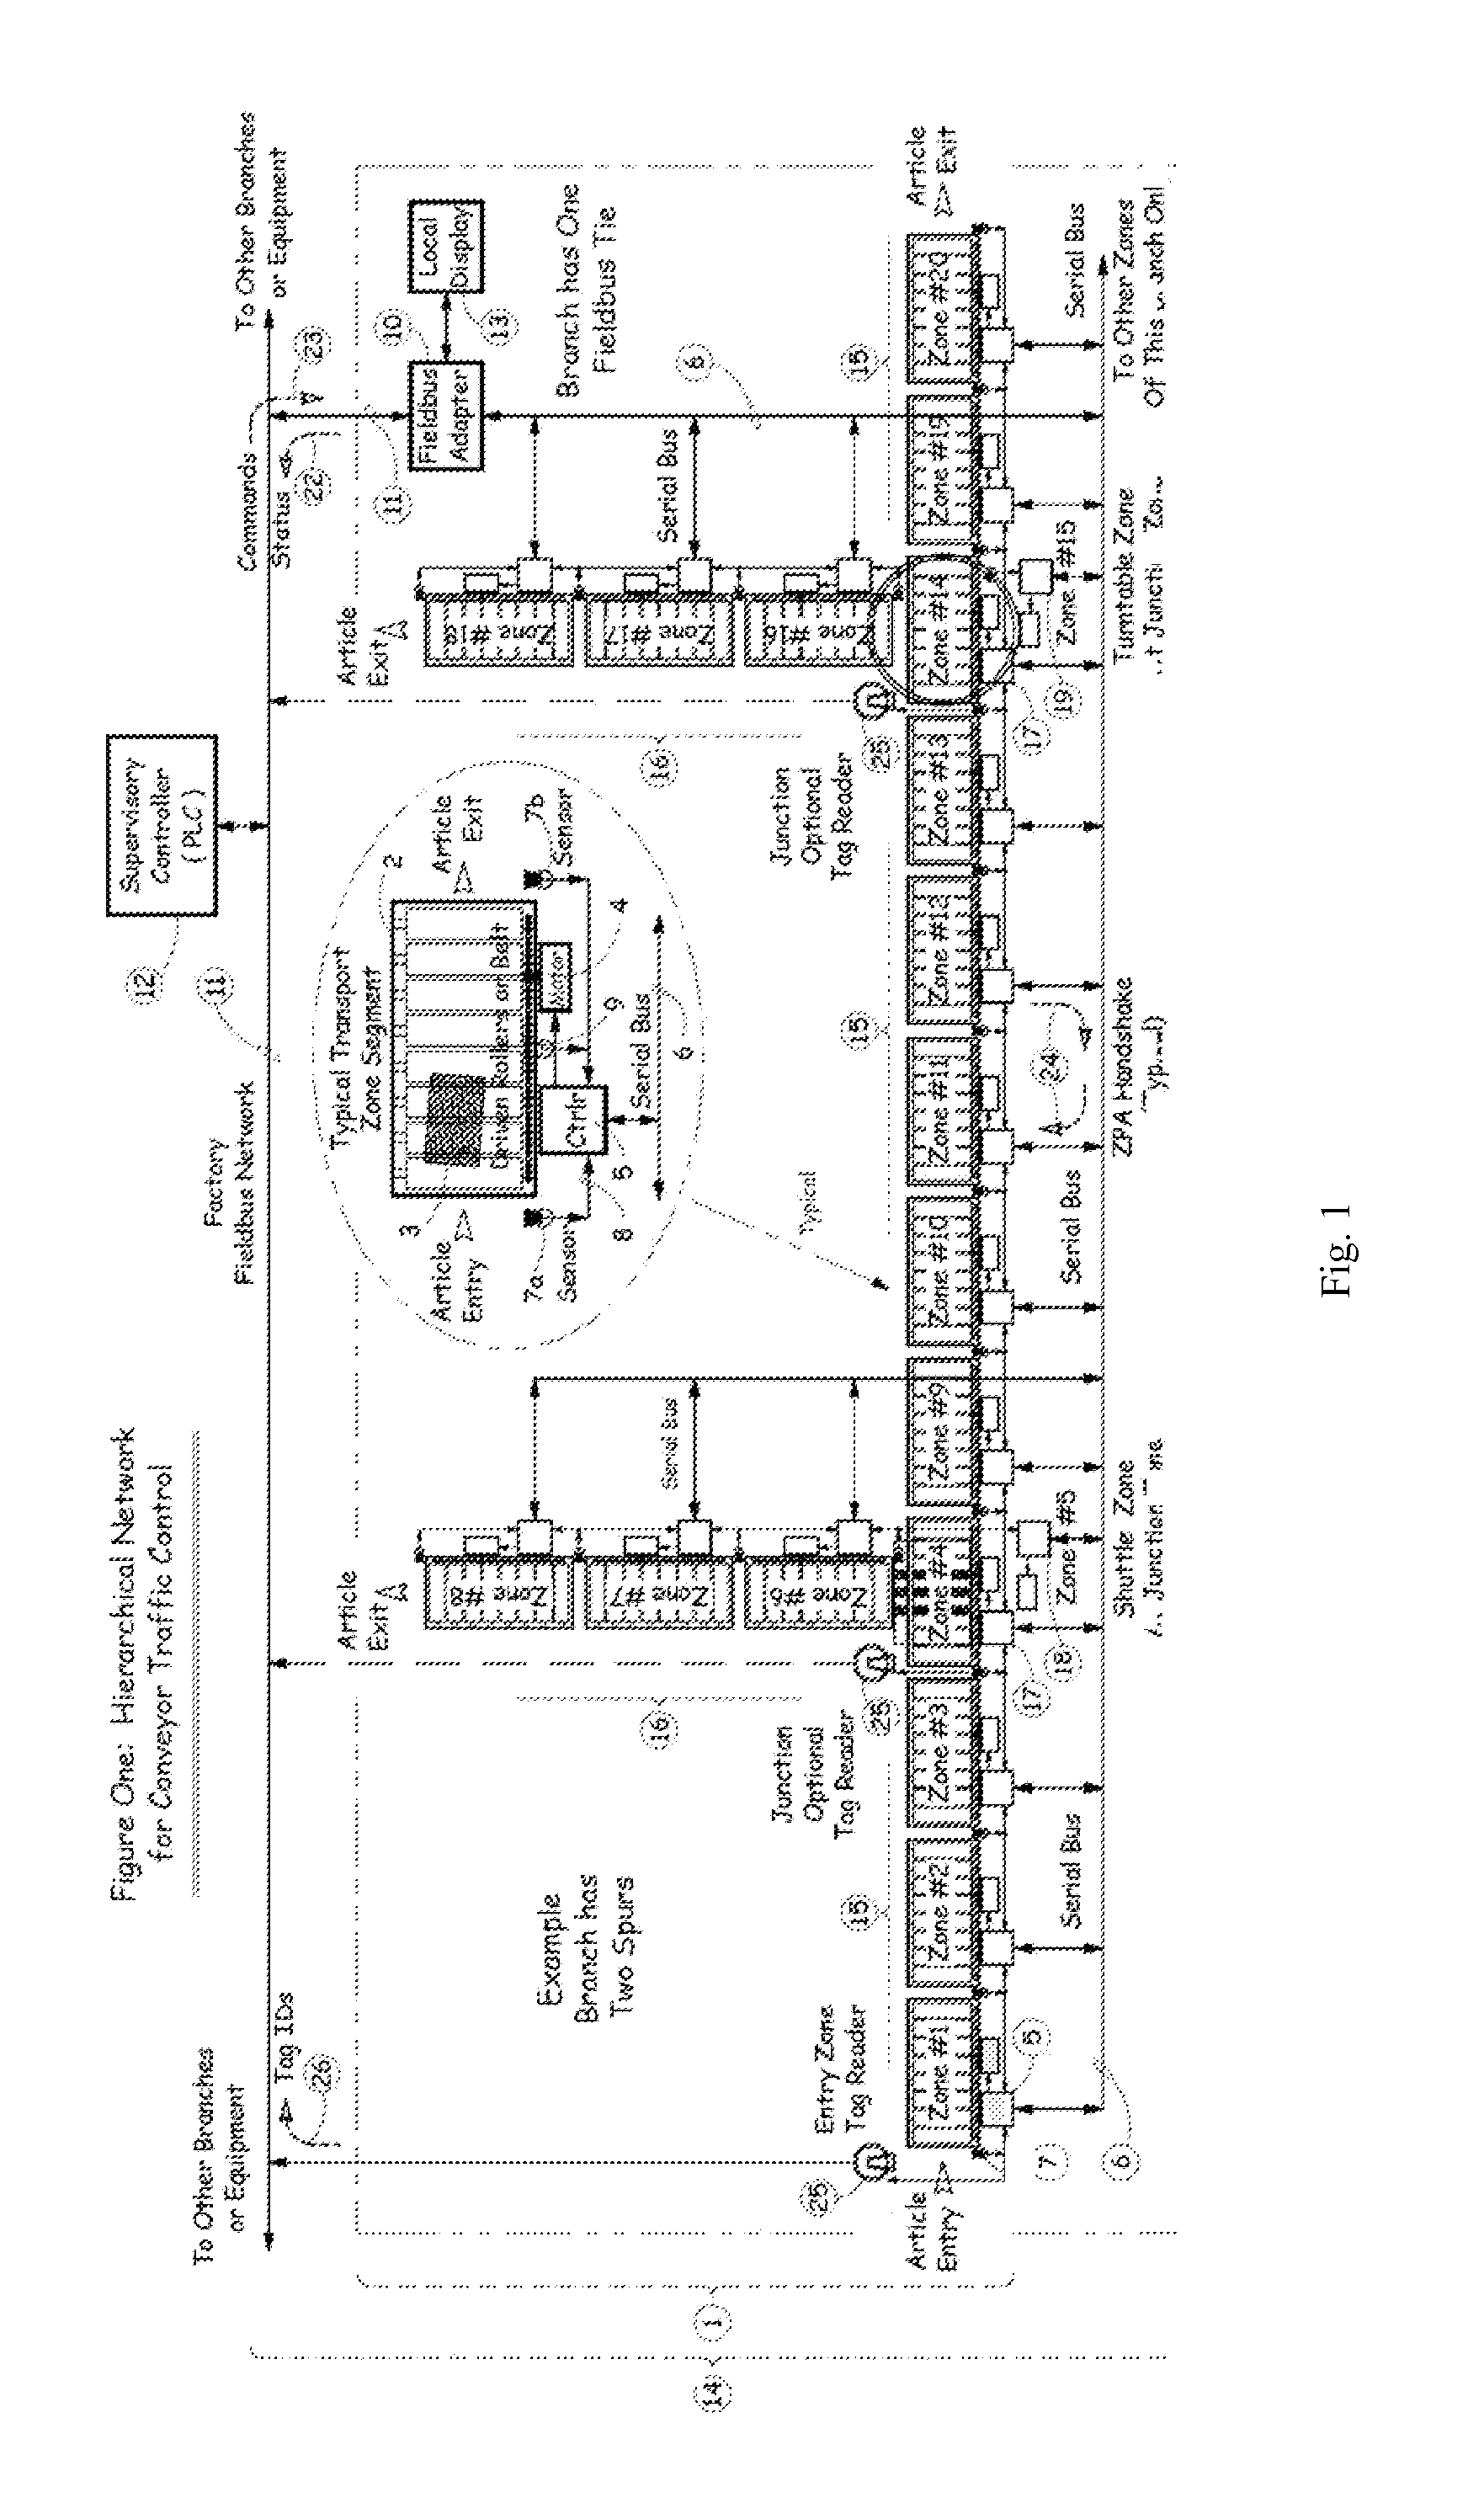 Tiered communication scheme to embed conveyor ZPA and routing control